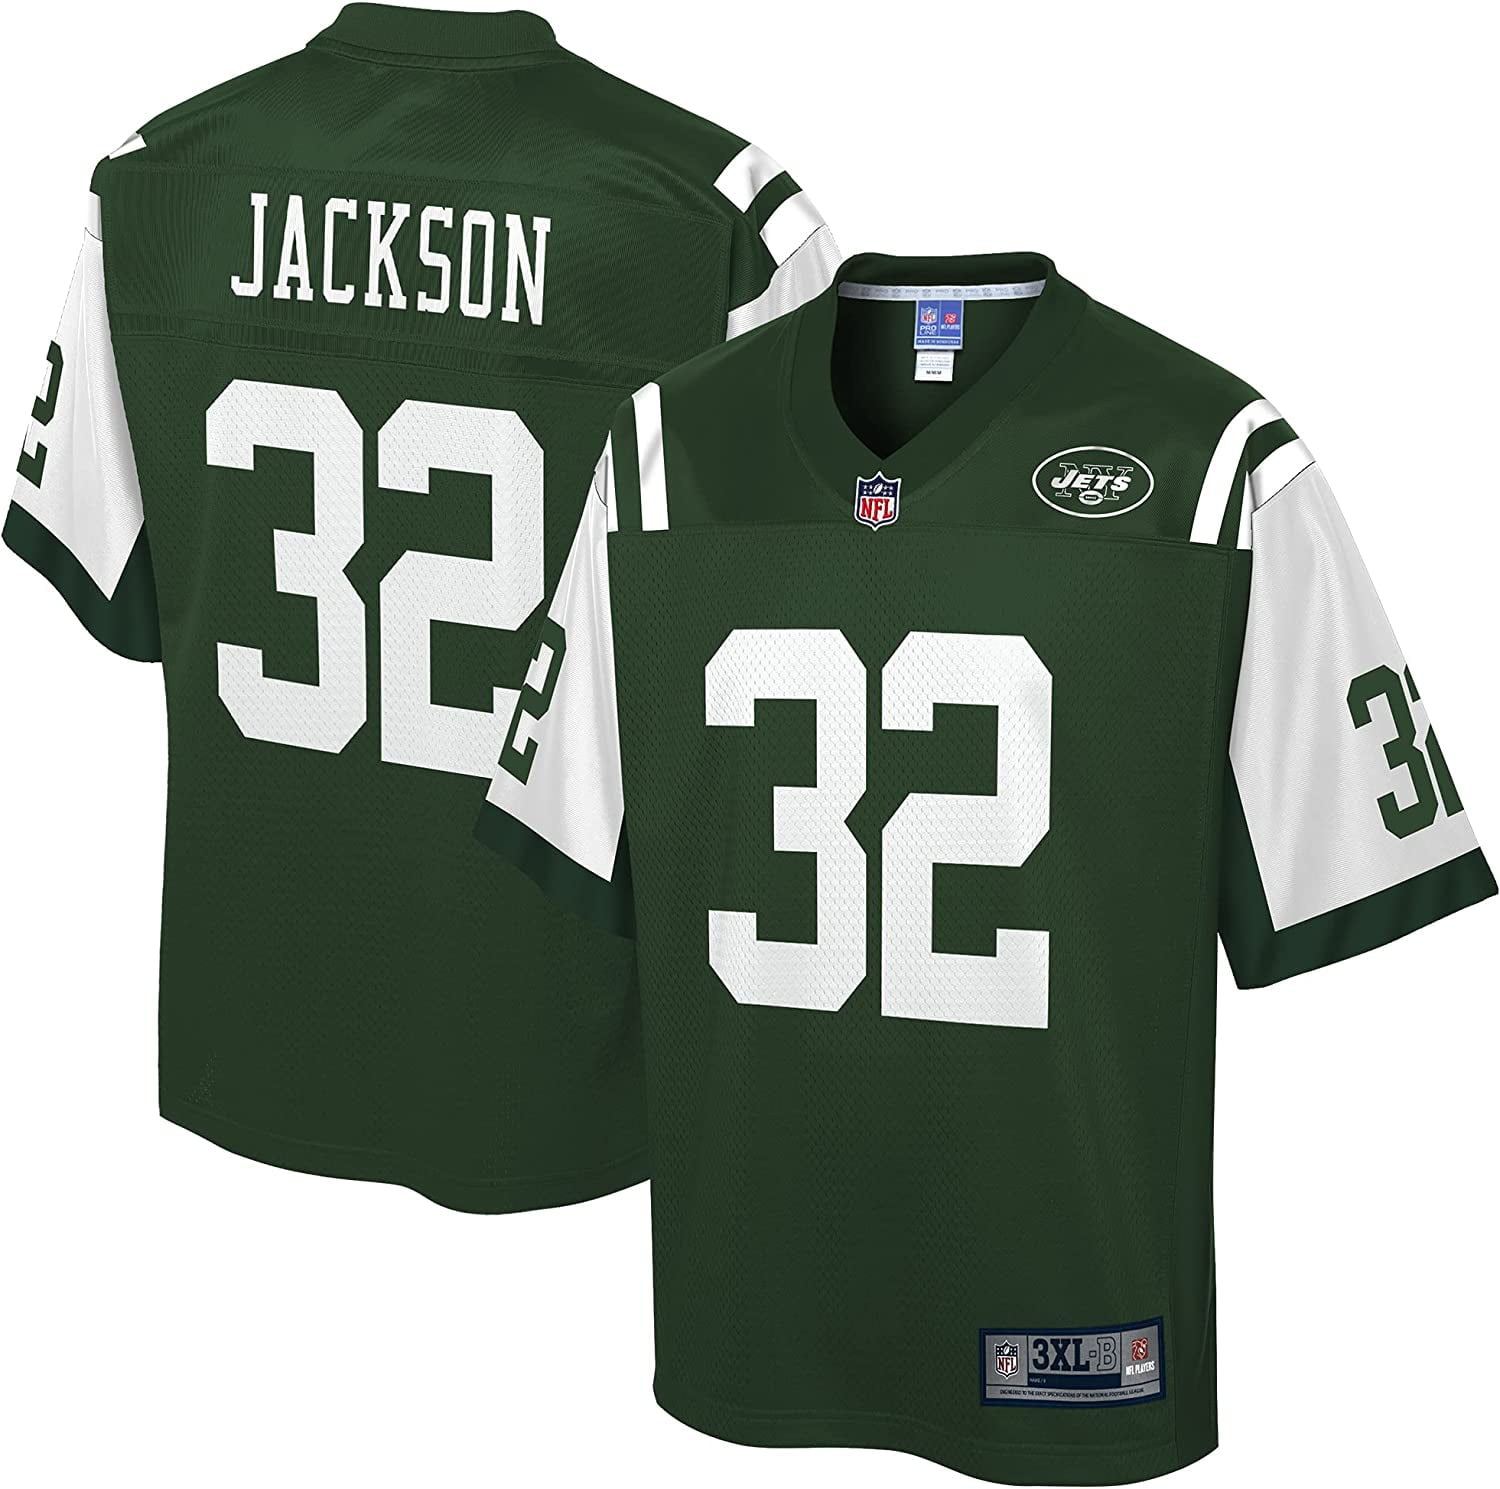 NFL_PRO LINE Men's Bennett Jackson Gotham Green New York Jets_ Big & Tall  Player Jersey(Player numbers can be customized) 